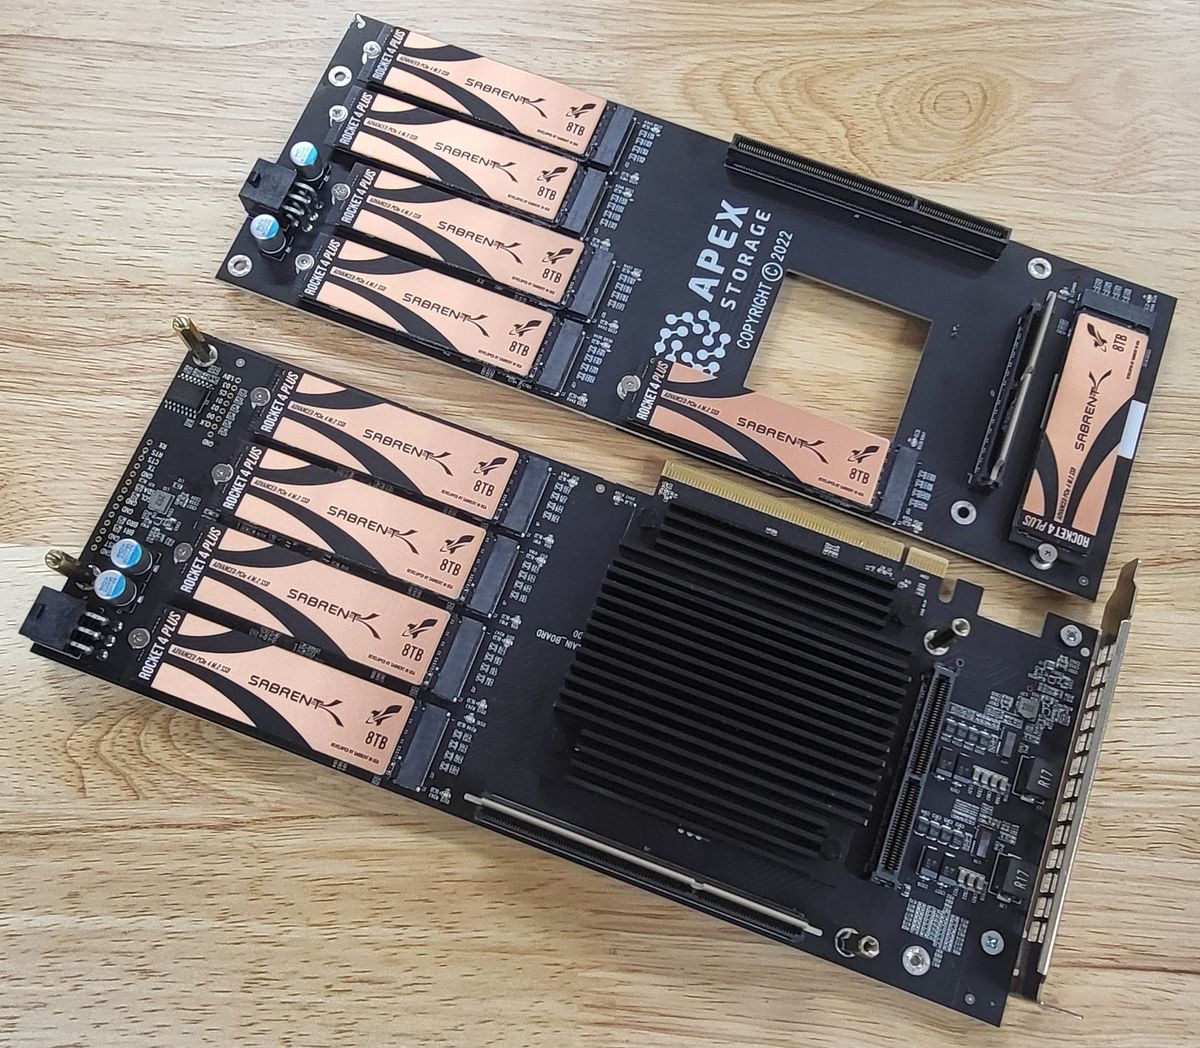 The first SSDs to run at ultra-rapid 13,000MB/s break surface at Computex